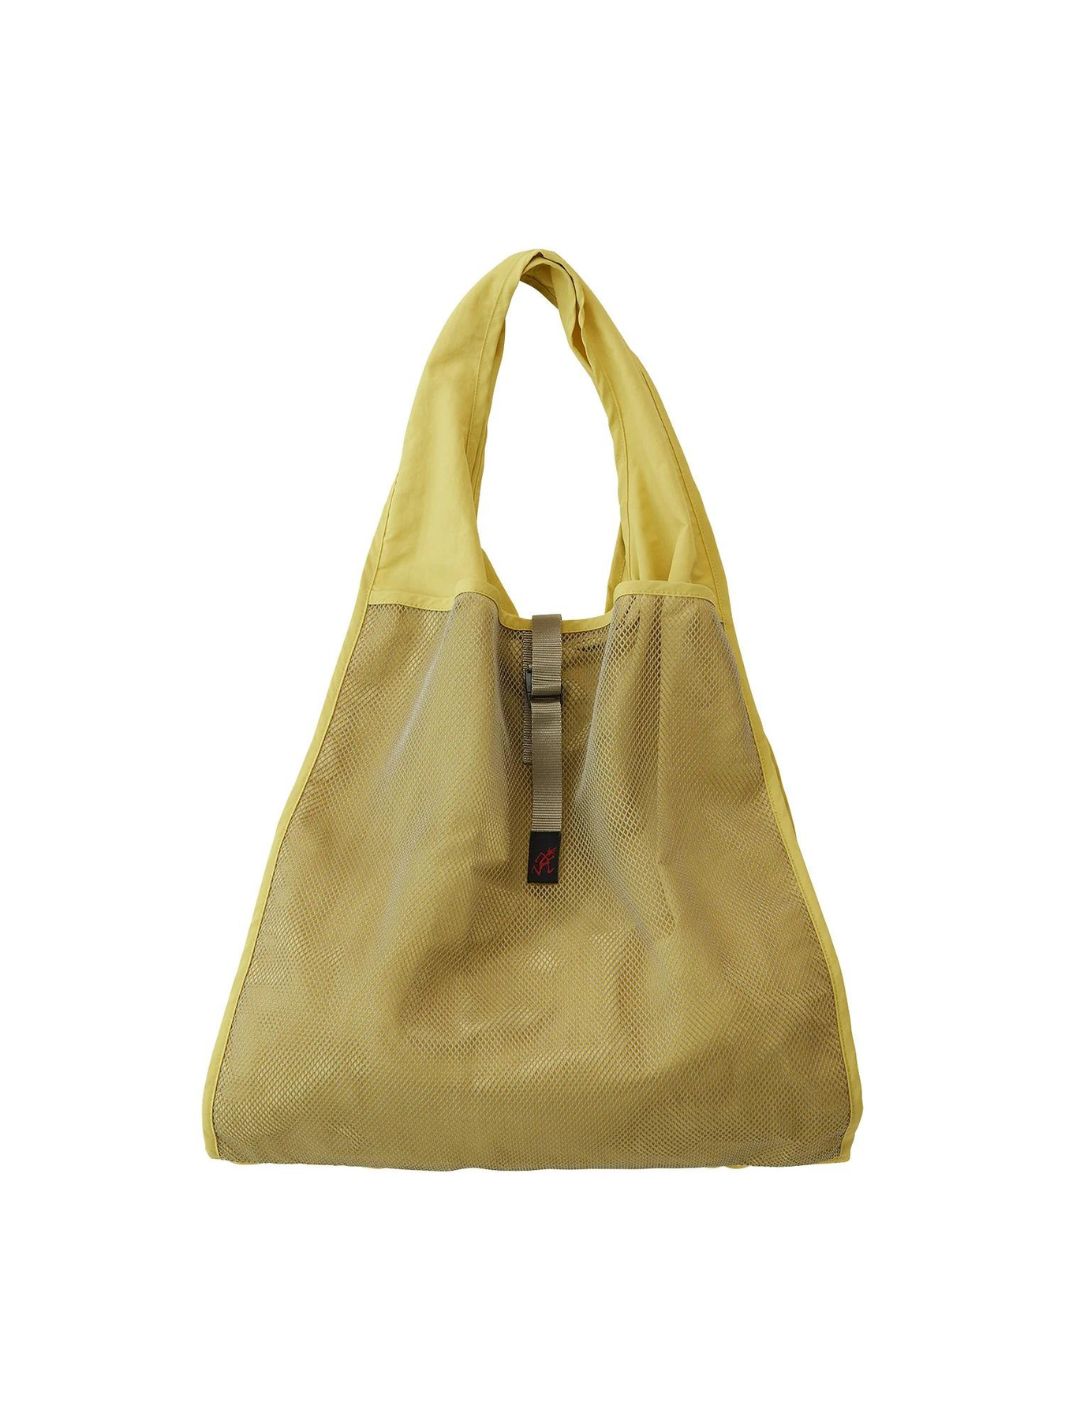 Gramicci Bags Bag | Daily Bag Canary Yellow